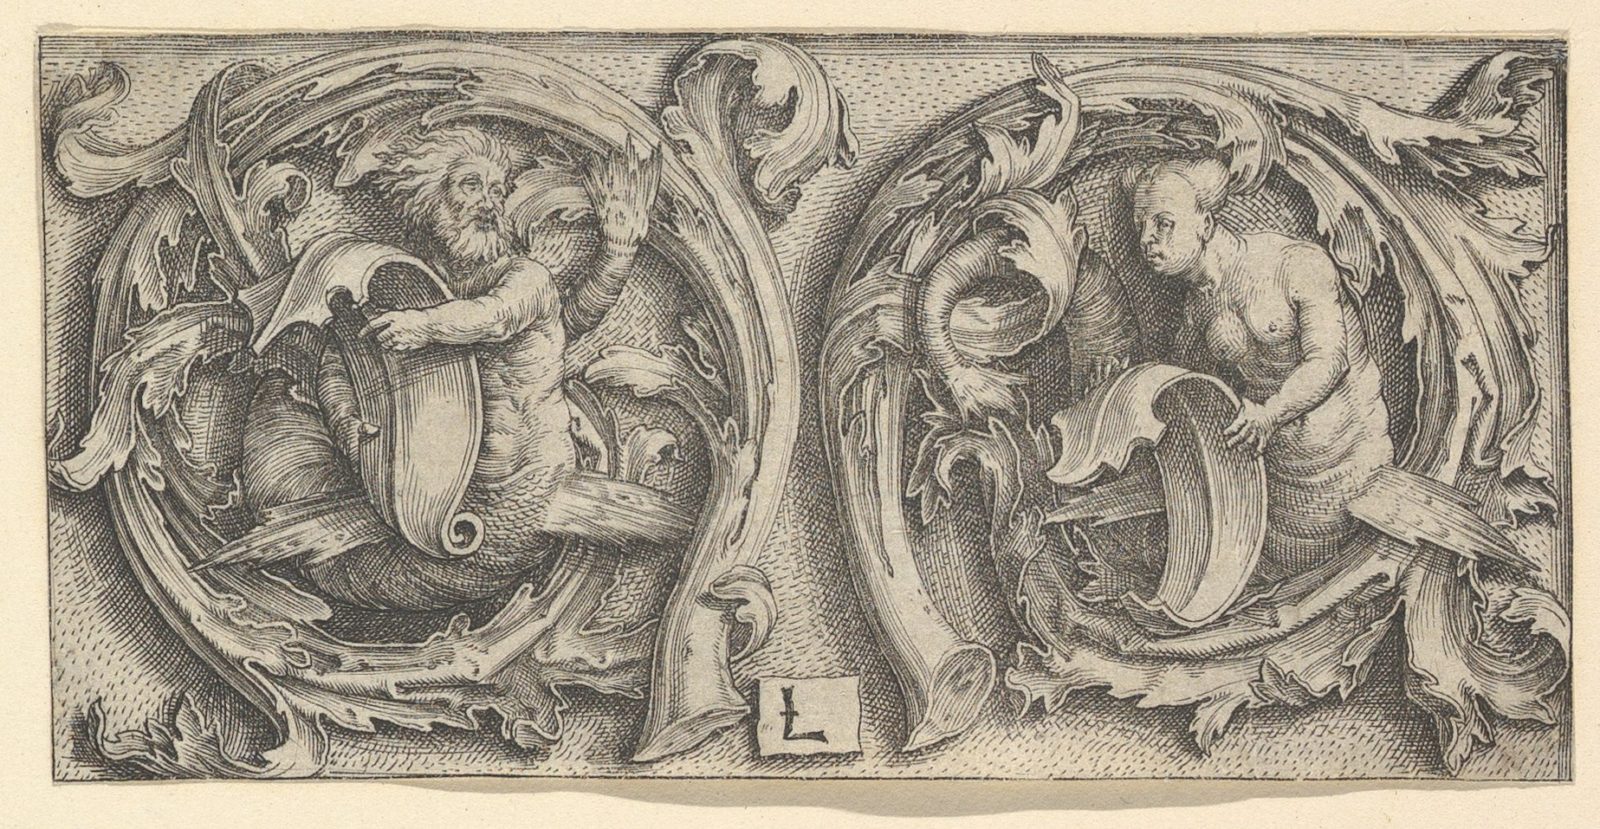 image is an old etching depicting Triton and a siren